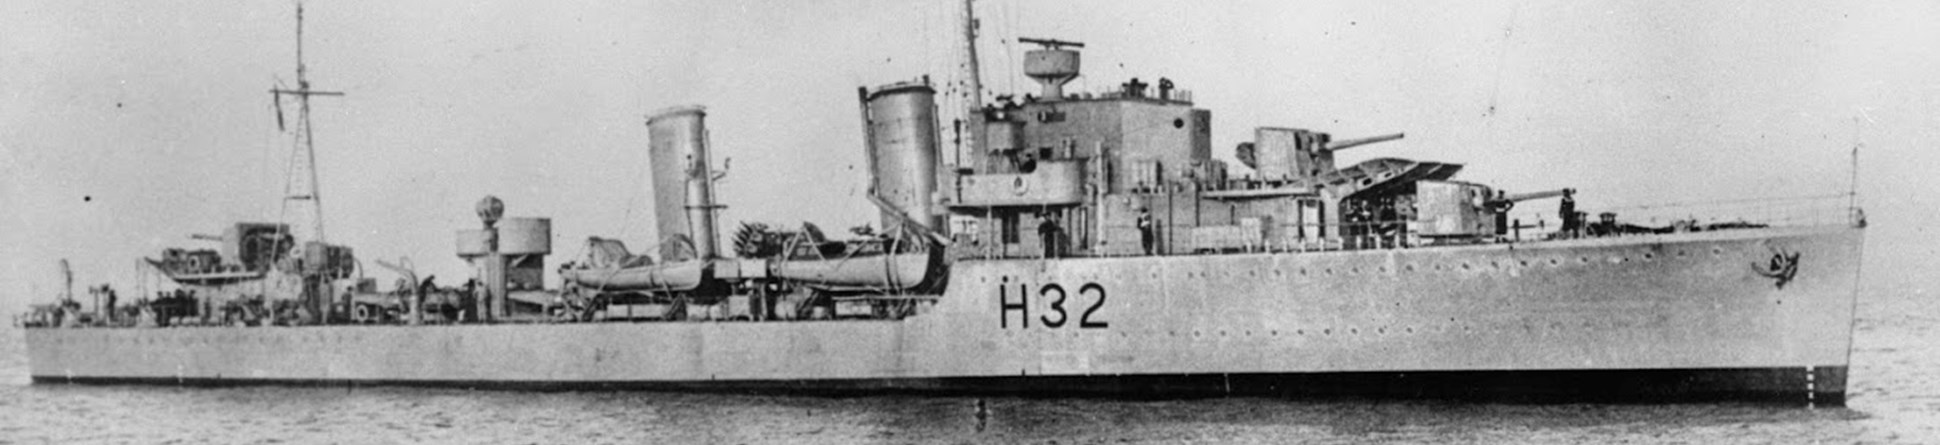 A black and white image of a Second World War destroyer ship on open water